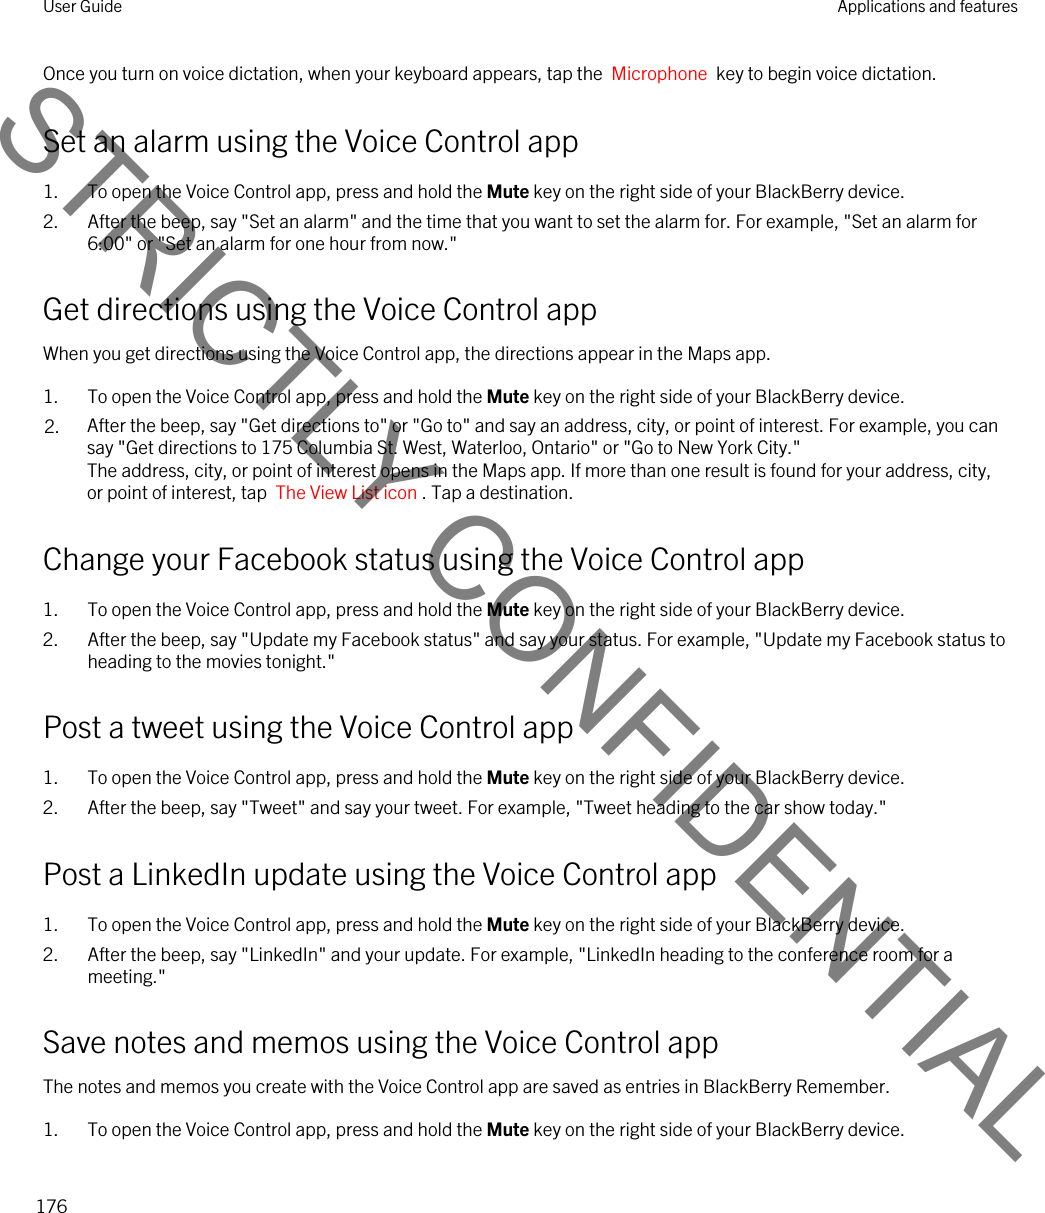 Once you turn on voice dictation, when your keyboard appears, tap the  Microphone  key to begin voice dictation.Set an alarm using the Voice Control app1. To open the Voice Control app, press and hold the Mute key on the right side of your BlackBerry device.2. After the beep, say &quot;Set an alarm&quot; and the time that you want to set the alarm for. For example, &quot;Set an alarm for 6:00&quot; or &quot;Set an alarm for one hour from now.&quot;Get directions using the Voice Control appWhen you get directions using the Voice Control app, the directions appear in the Maps app.1. To open the Voice Control app, press and hold the Mute key on the right side of your BlackBerry device.2. After the beep, say &quot;Get directions to&quot; or &quot;Go to&quot; and say an address, city, or point of interest. For example, you can say &quot;Get directions to 175 Columbia St. West, Waterloo, Ontario&quot; or &quot;Go to New York City.&quot;The address, city, or point of interest opens in the Maps app. If more than one result is found for your address, city, or point of interest, tap  The View List icon . Tap a destination.Change your Facebook status using the Voice Control app1. To open the Voice Control app, press and hold the Mute key on the right side of your BlackBerry device.2. After the beep, say &quot;Update my Facebook status&quot; and say your status. For example, &quot;Update my Facebook status to heading to the movies tonight.&quot;Post a tweet using the Voice Control app1. To open the Voice Control app, press and hold the Mute key on the right side of your BlackBerry device.2. After the beep, say &quot;Tweet&quot; and say your tweet. For example, &quot;Tweet heading to the car show today.&quot;Post a LinkedIn update using the Voice Control app1. To open the Voice Control app, press and hold the Mute key on the right side of your BlackBerry device.2. After the beep, say &quot;LinkedIn&quot; and your update. For example, &quot;LinkedIn heading to the conference room for a meeting.&quot;Save notes and memos using the Voice Control appThe notes and memos you create with the Voice Control app are saved as entries in BlackBerry Remember.1. To open the Voice Control app, press and hold the Mute key on the right side of your BlackBerry device.User Guide Applications and features176STRICTLY CONFIDENTIAL